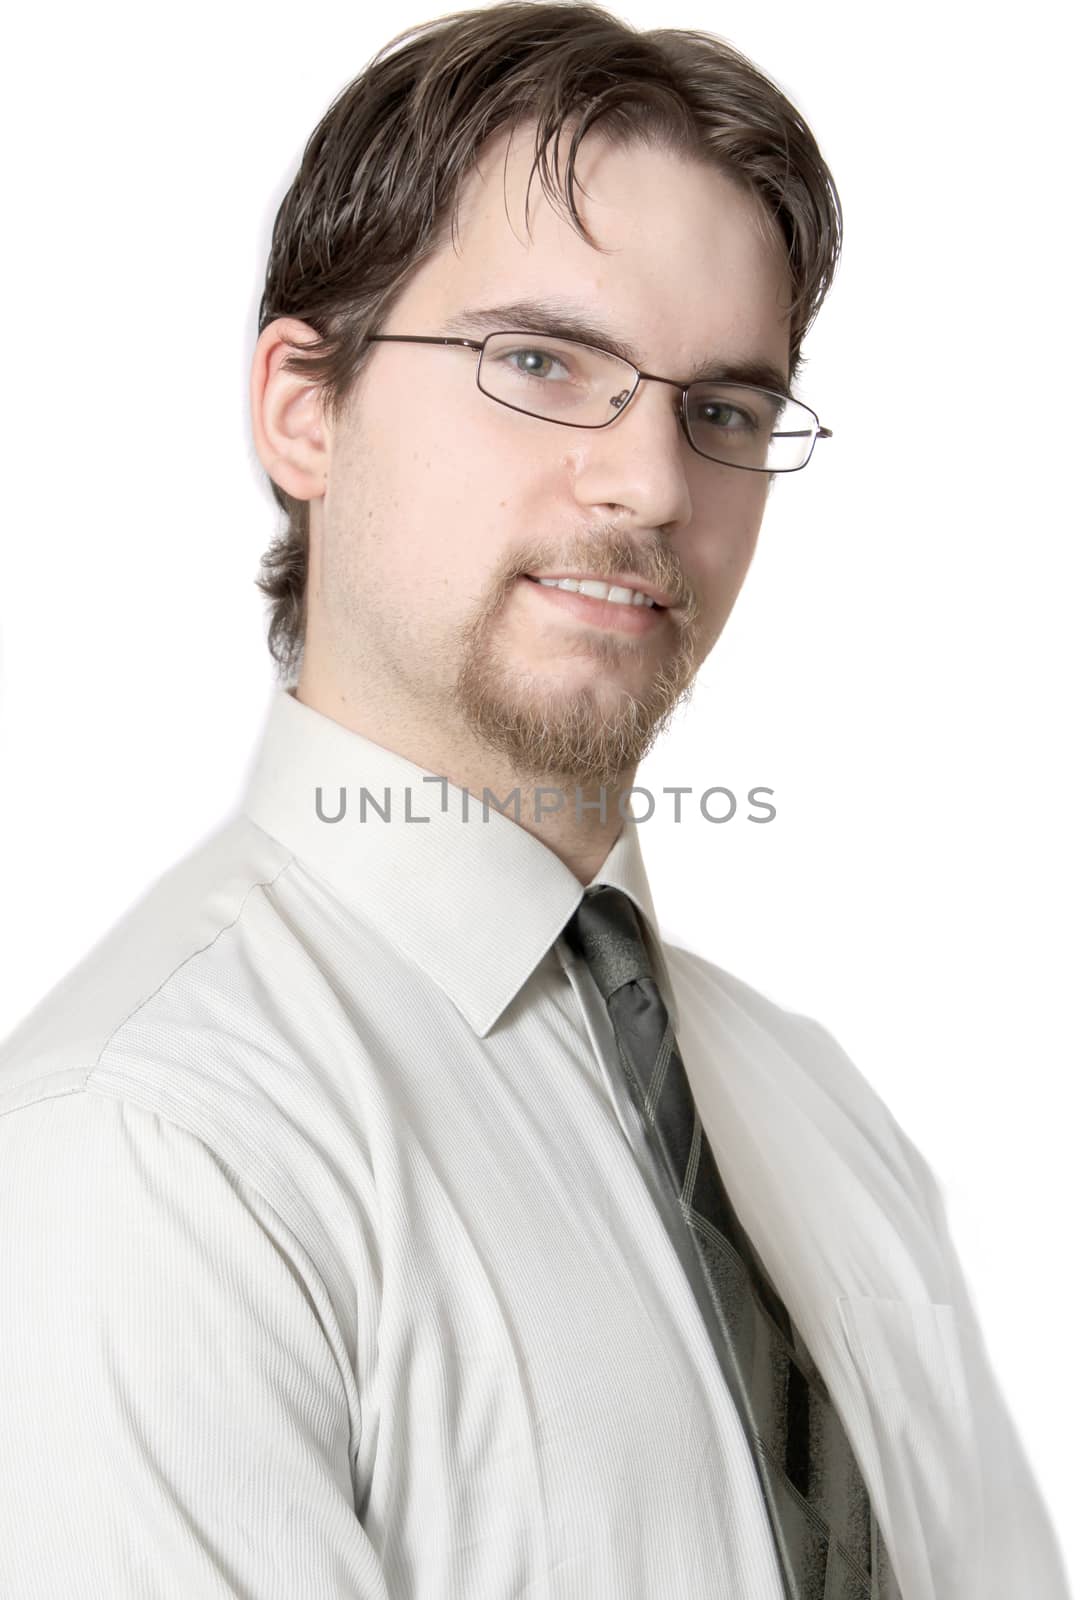 Handsome young executive with glasses on a white background